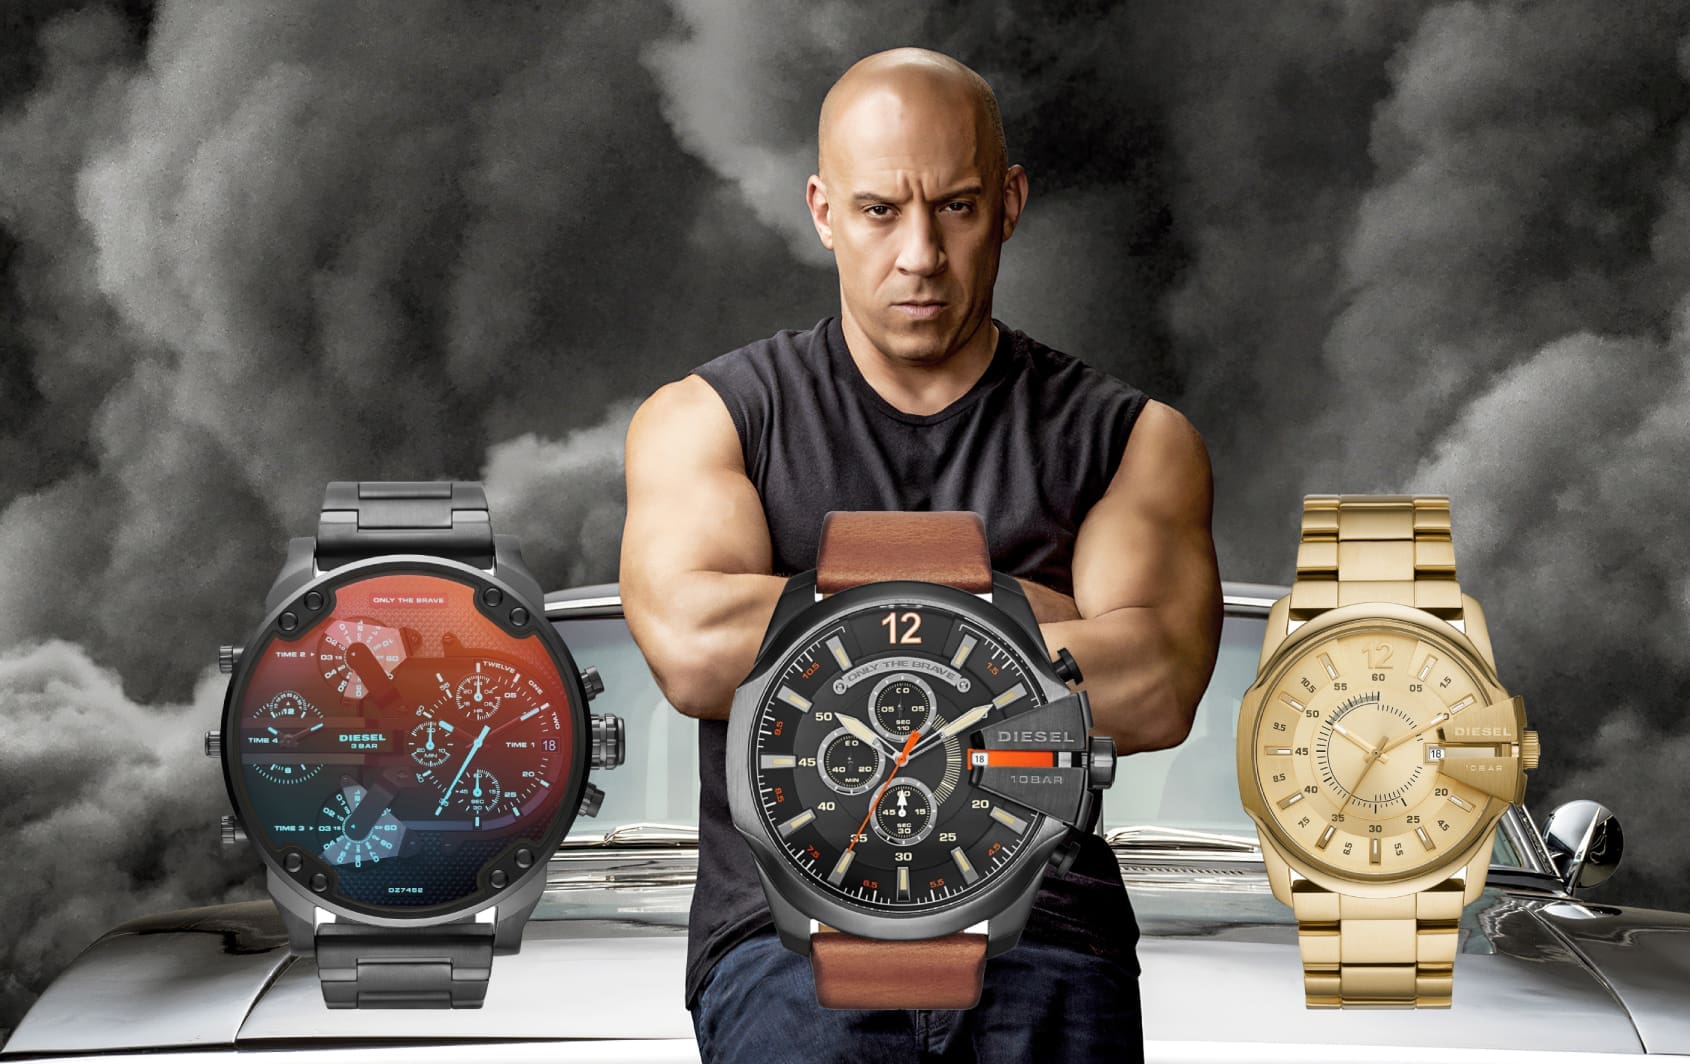 Fantasy Watch Ambassador: Dom Toretto joins the Diesel family